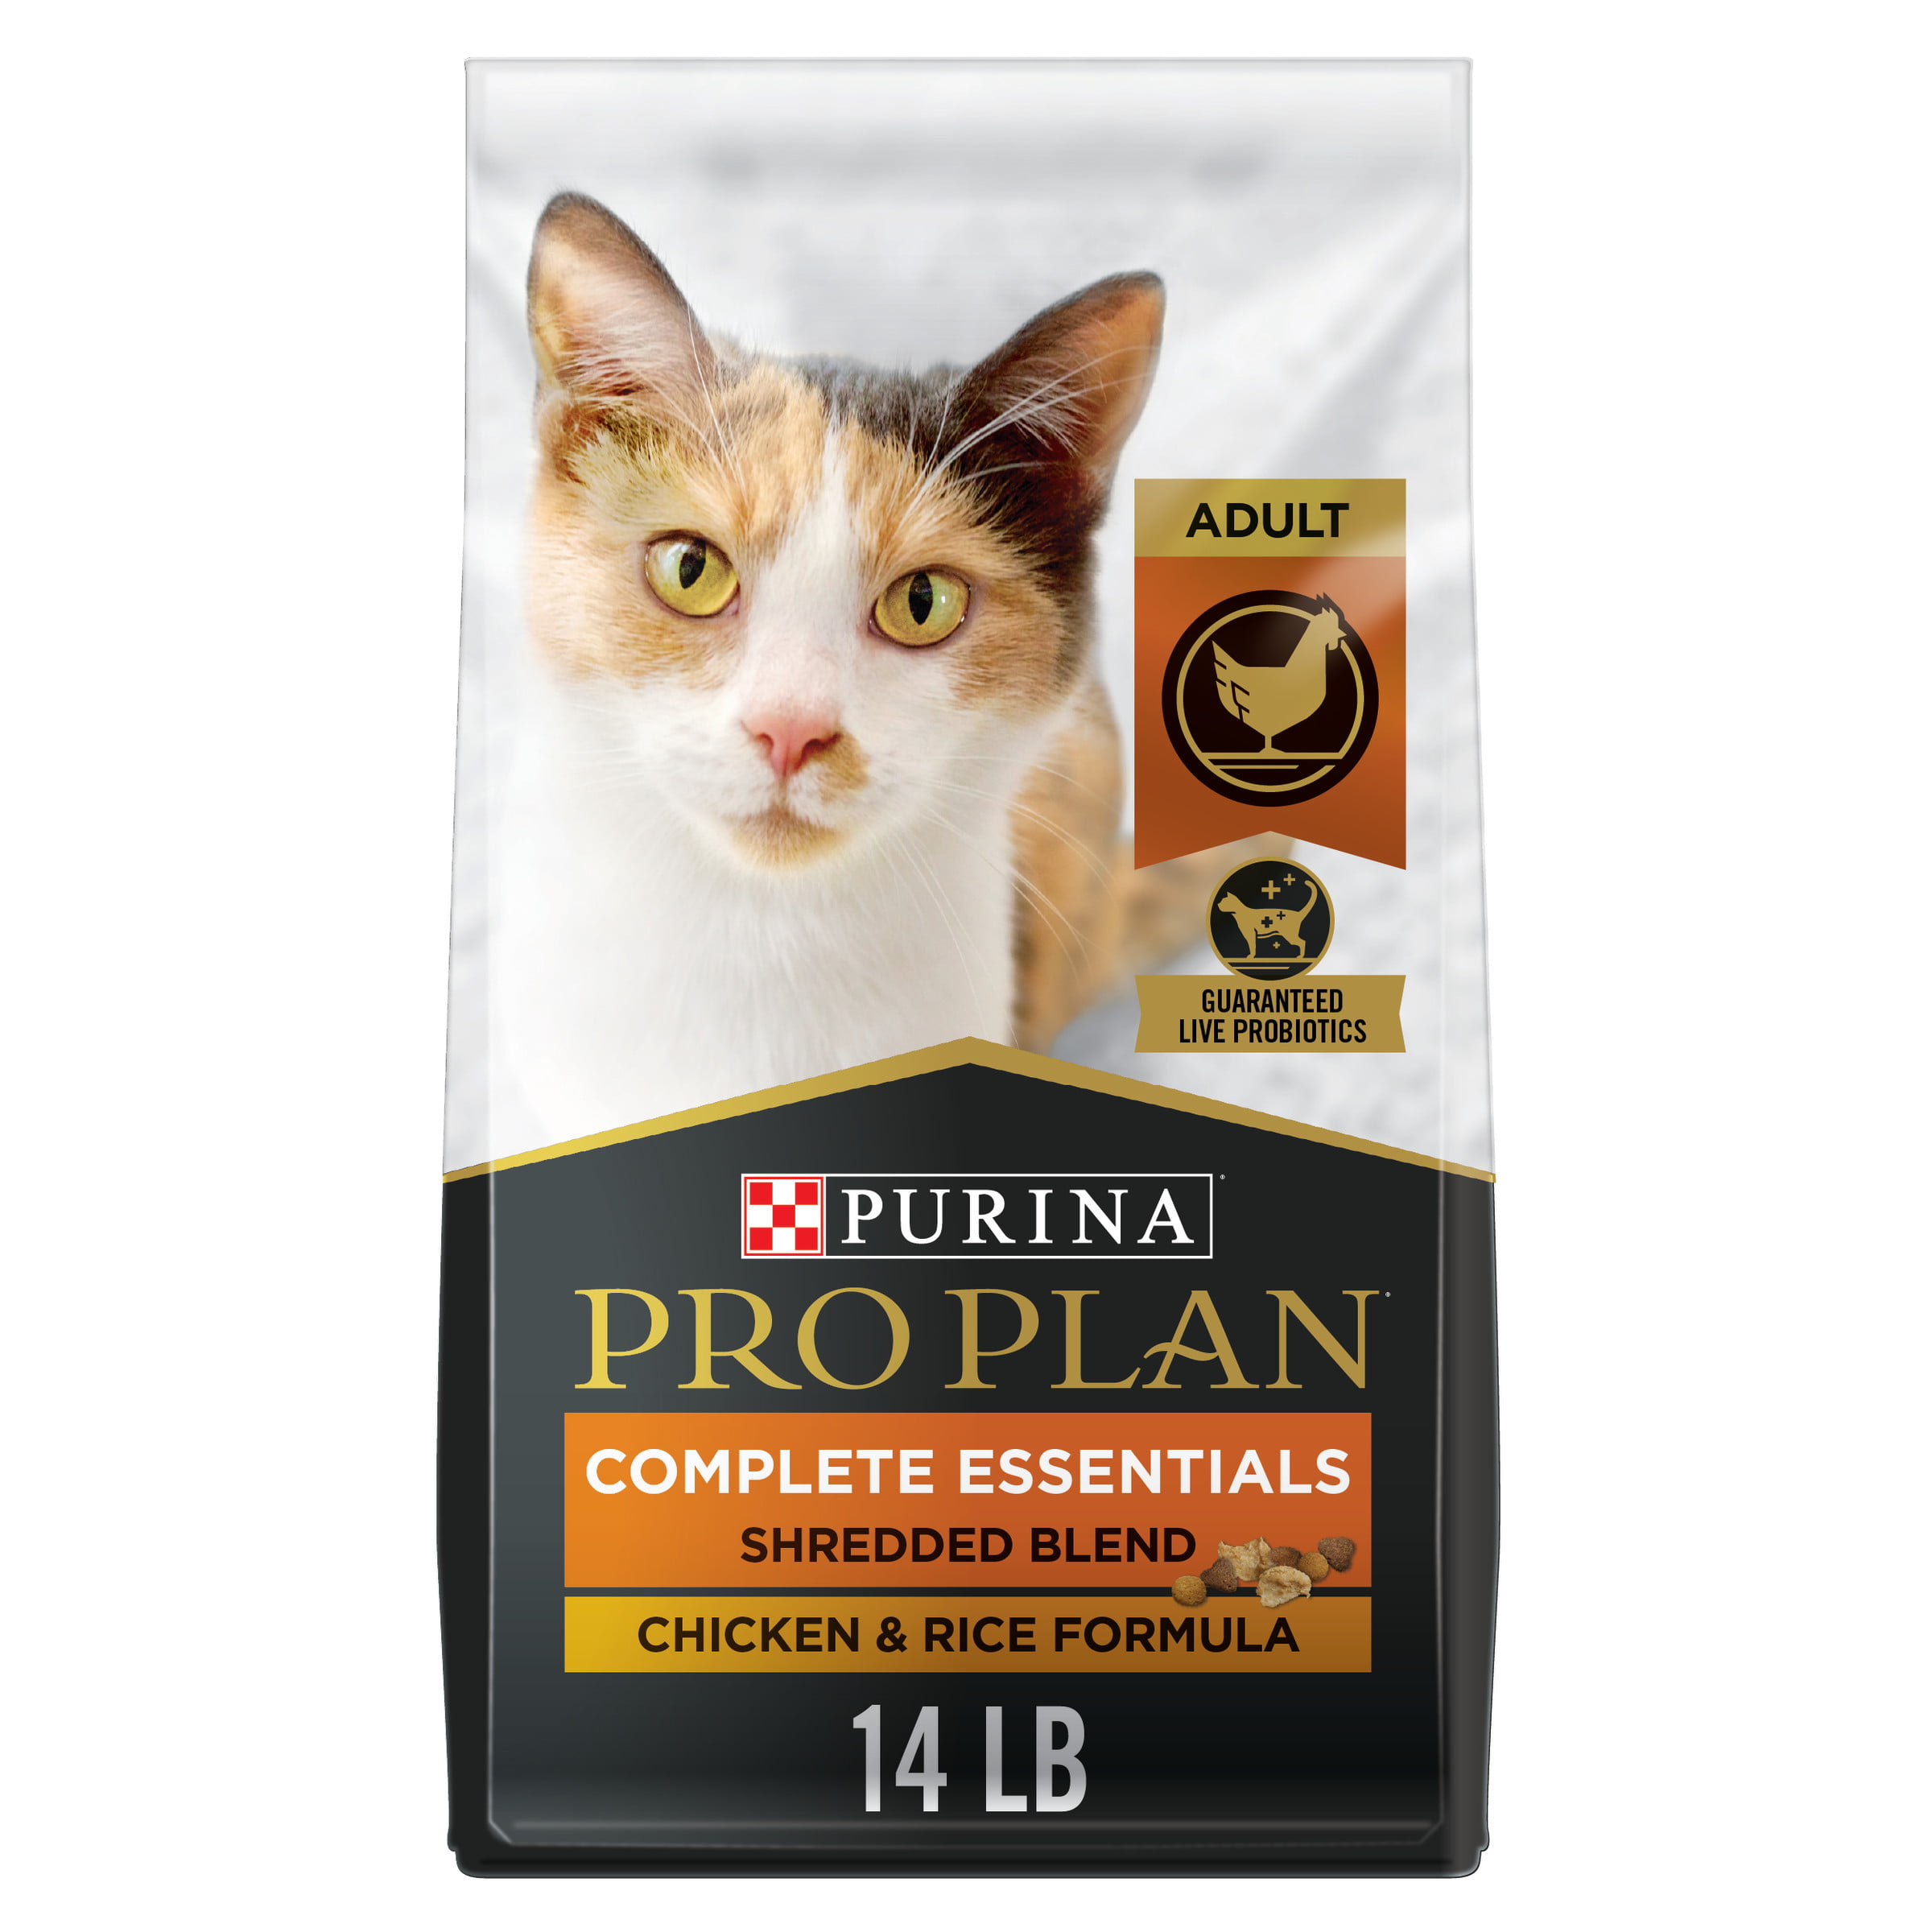 Purina Pro Plan High Protein Cat Food With Probiotics for Cats